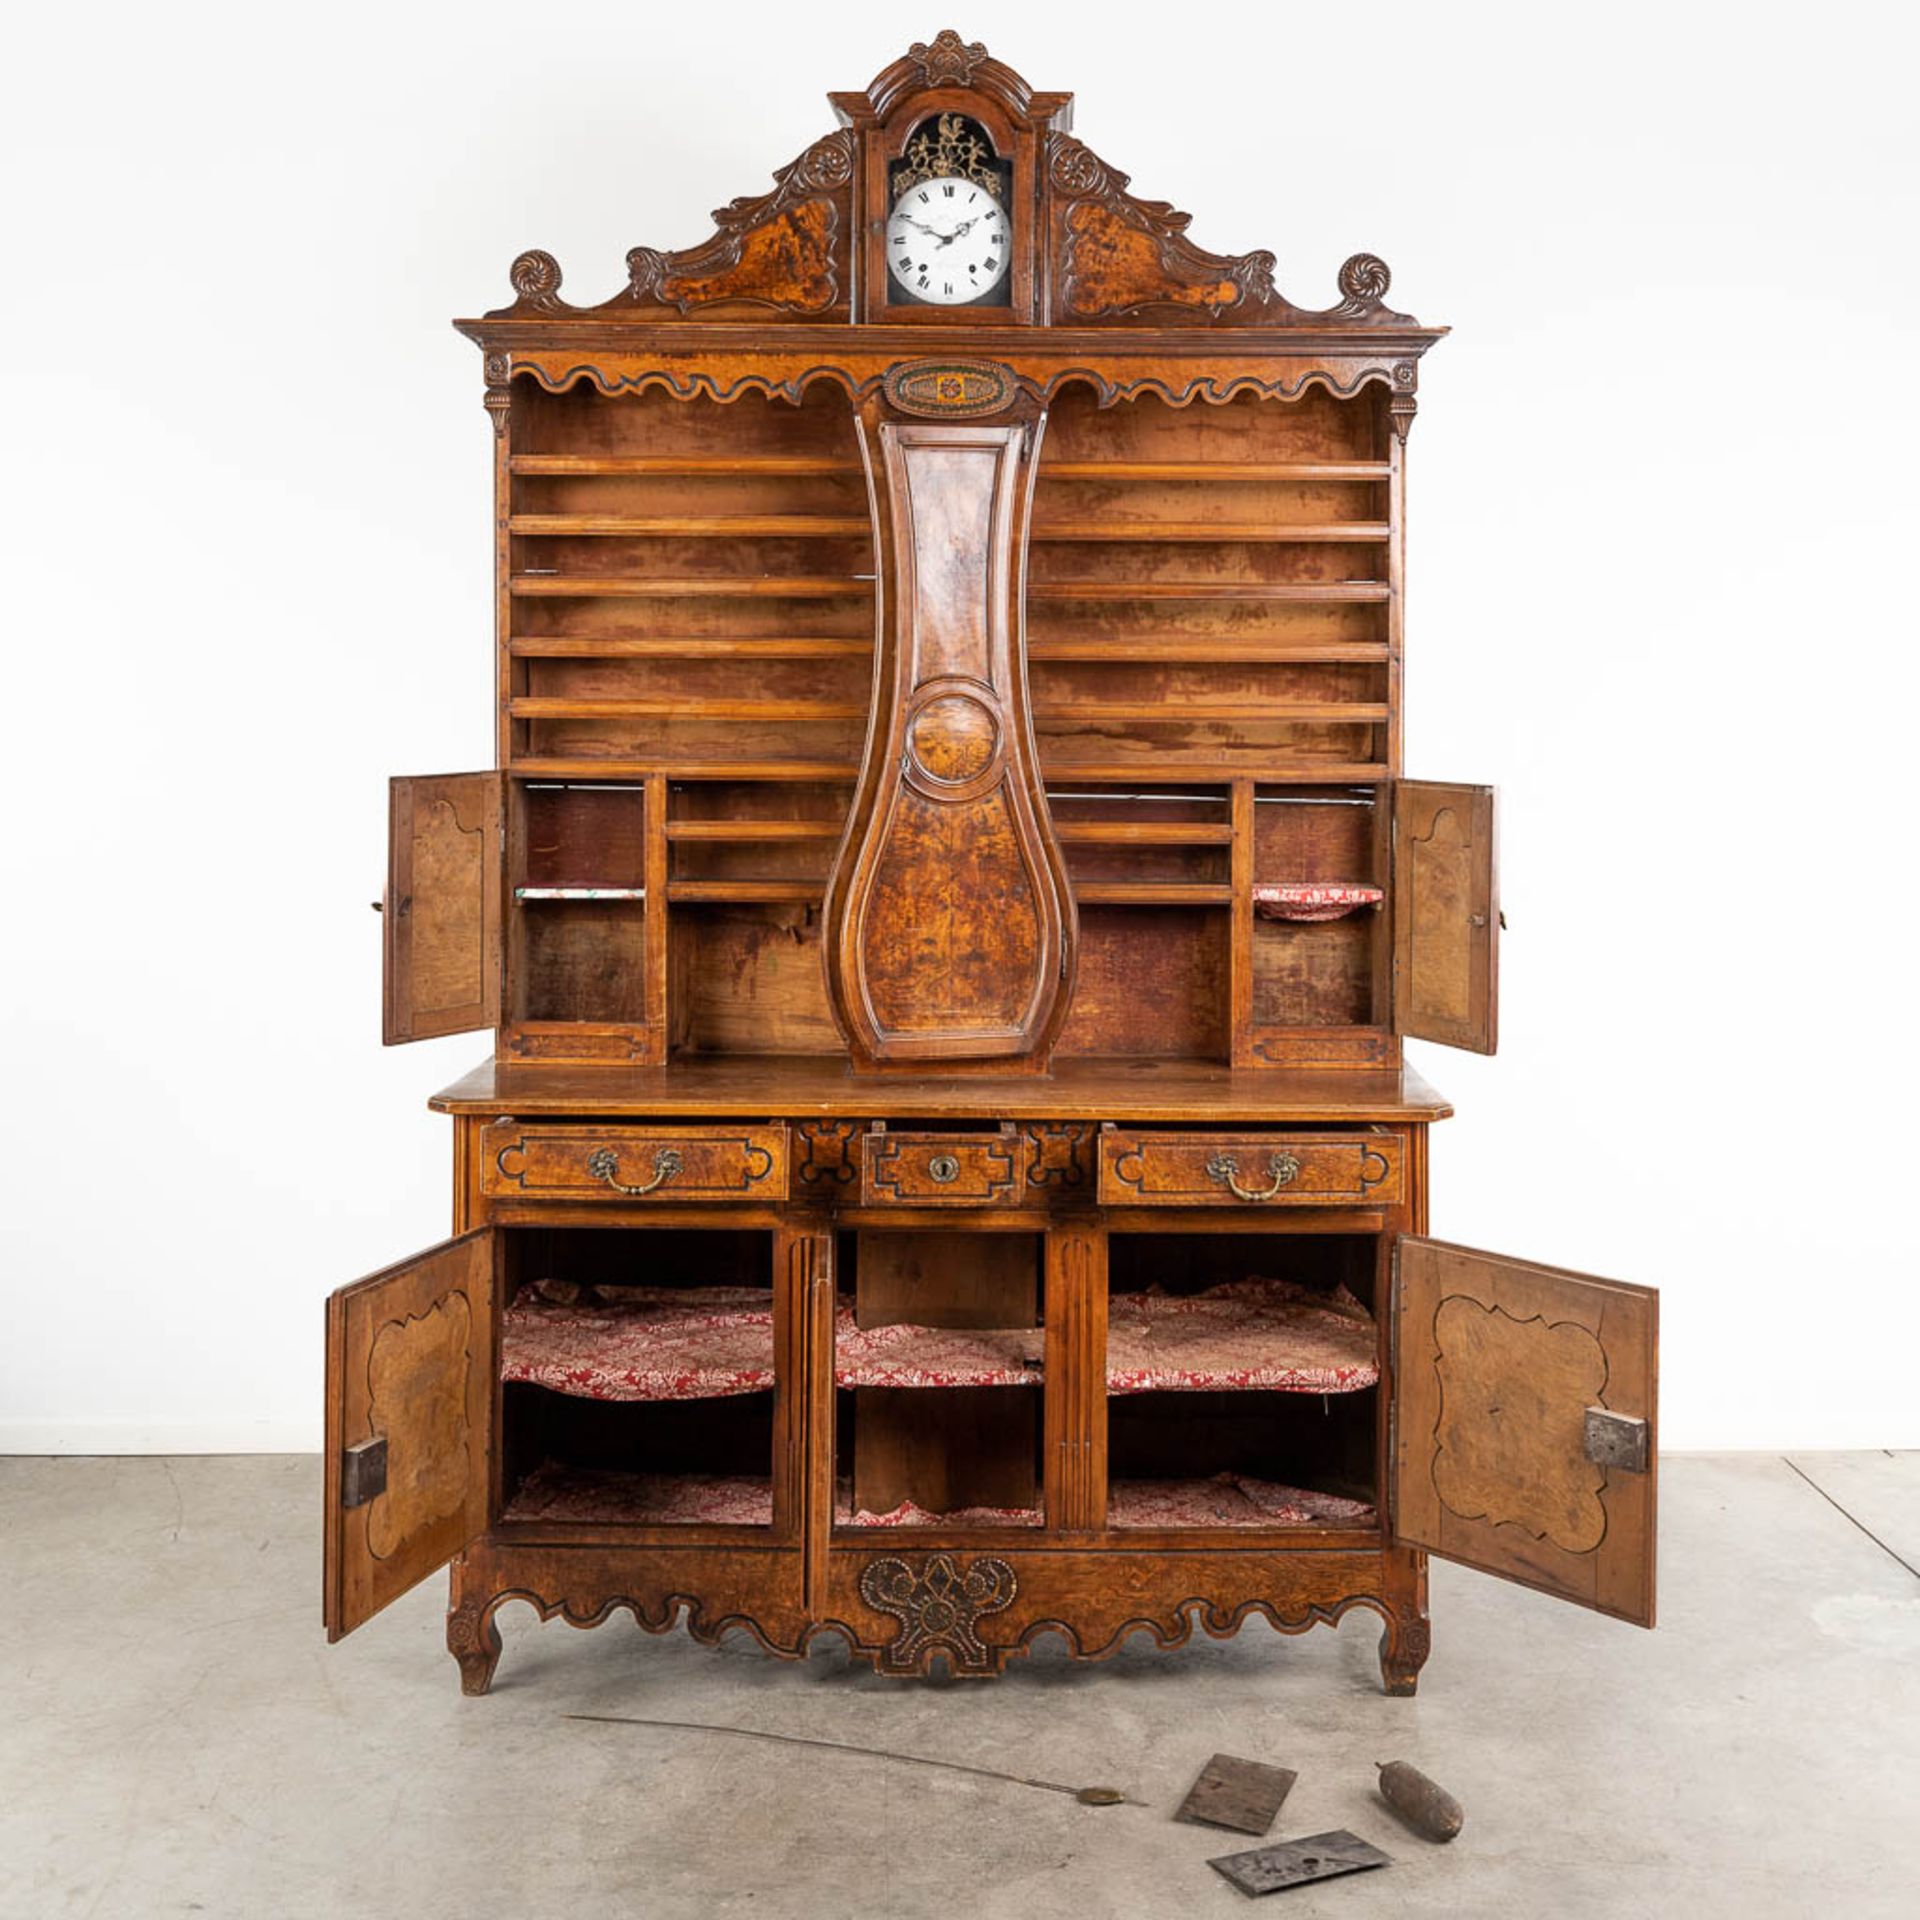 A Buffet, vaisselier, walnut with a standing clock, France, 18th C. (L: 60 x W: 180 x H: 298 cm) - Image 17 of 22